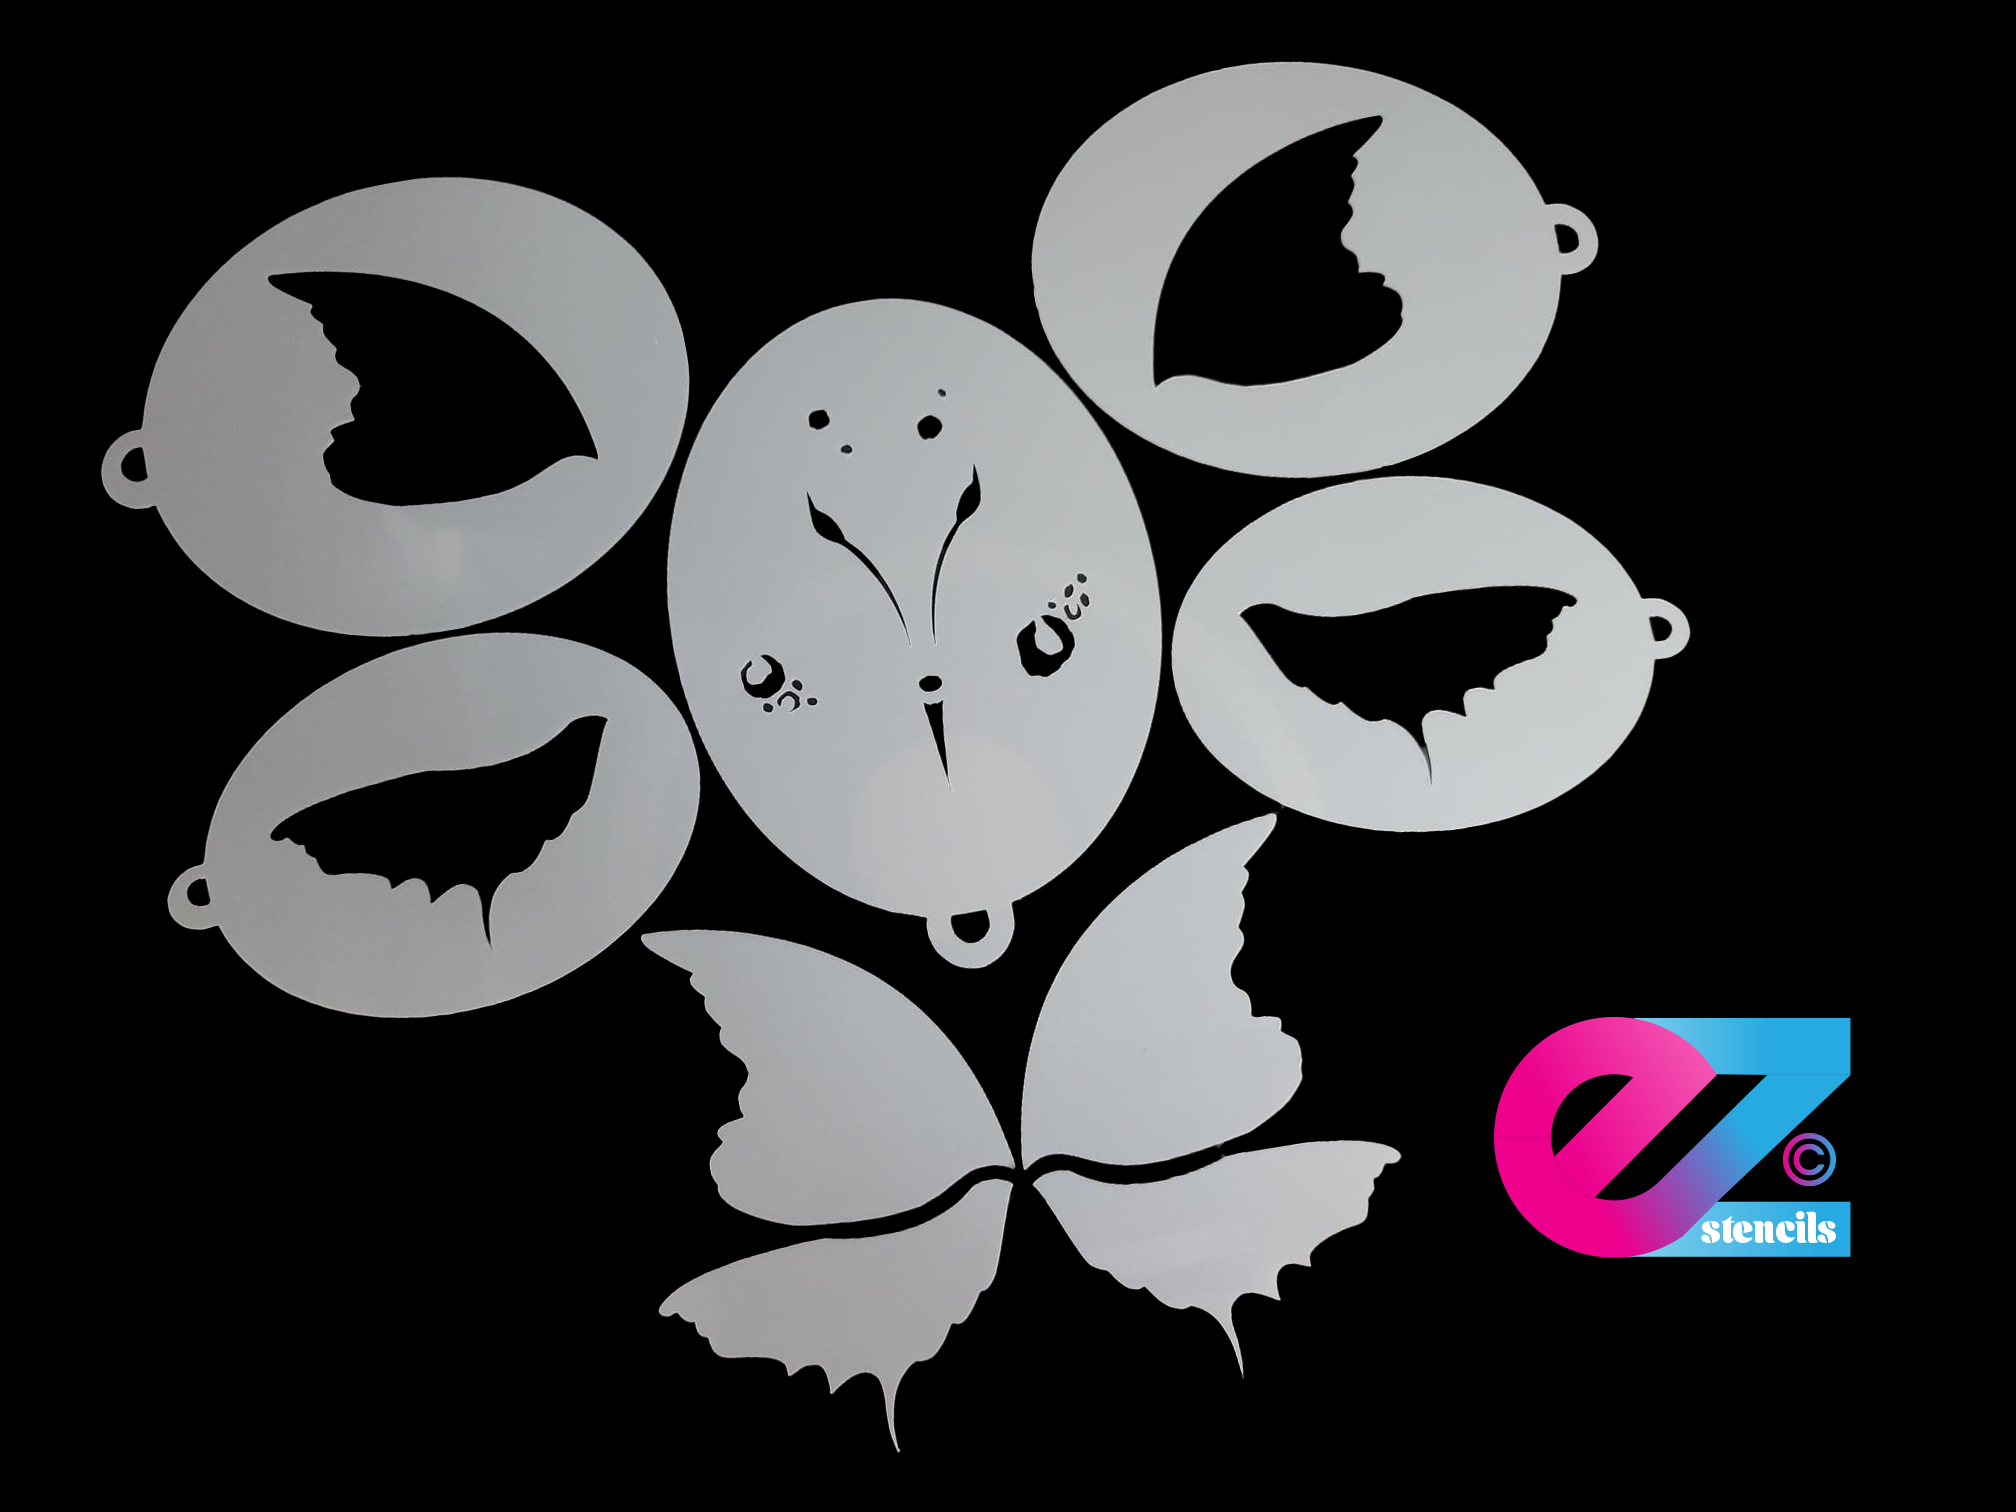 EZ Stencils - Butterfly 9 Stencil Set for Face Painting and Airbrush